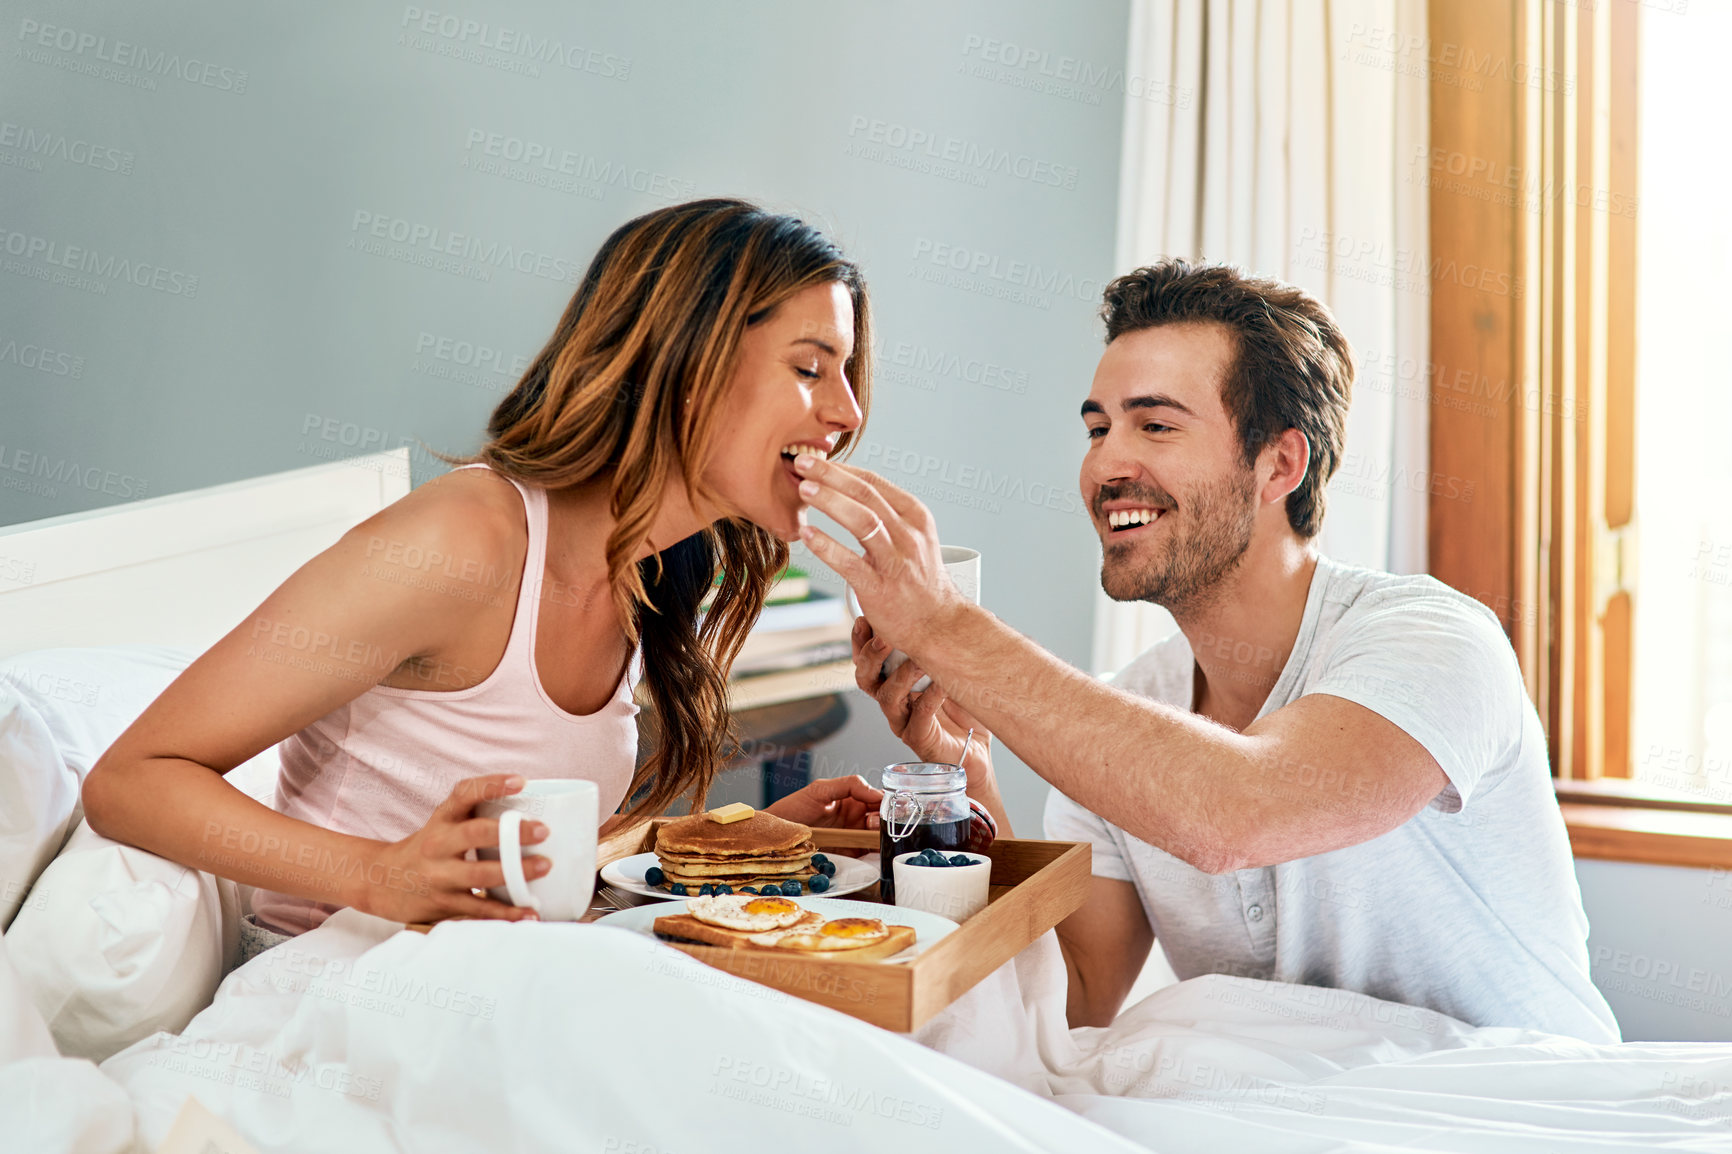 Buy stock photo Shot of a happy young couple enjoying breakfast in bed together at home